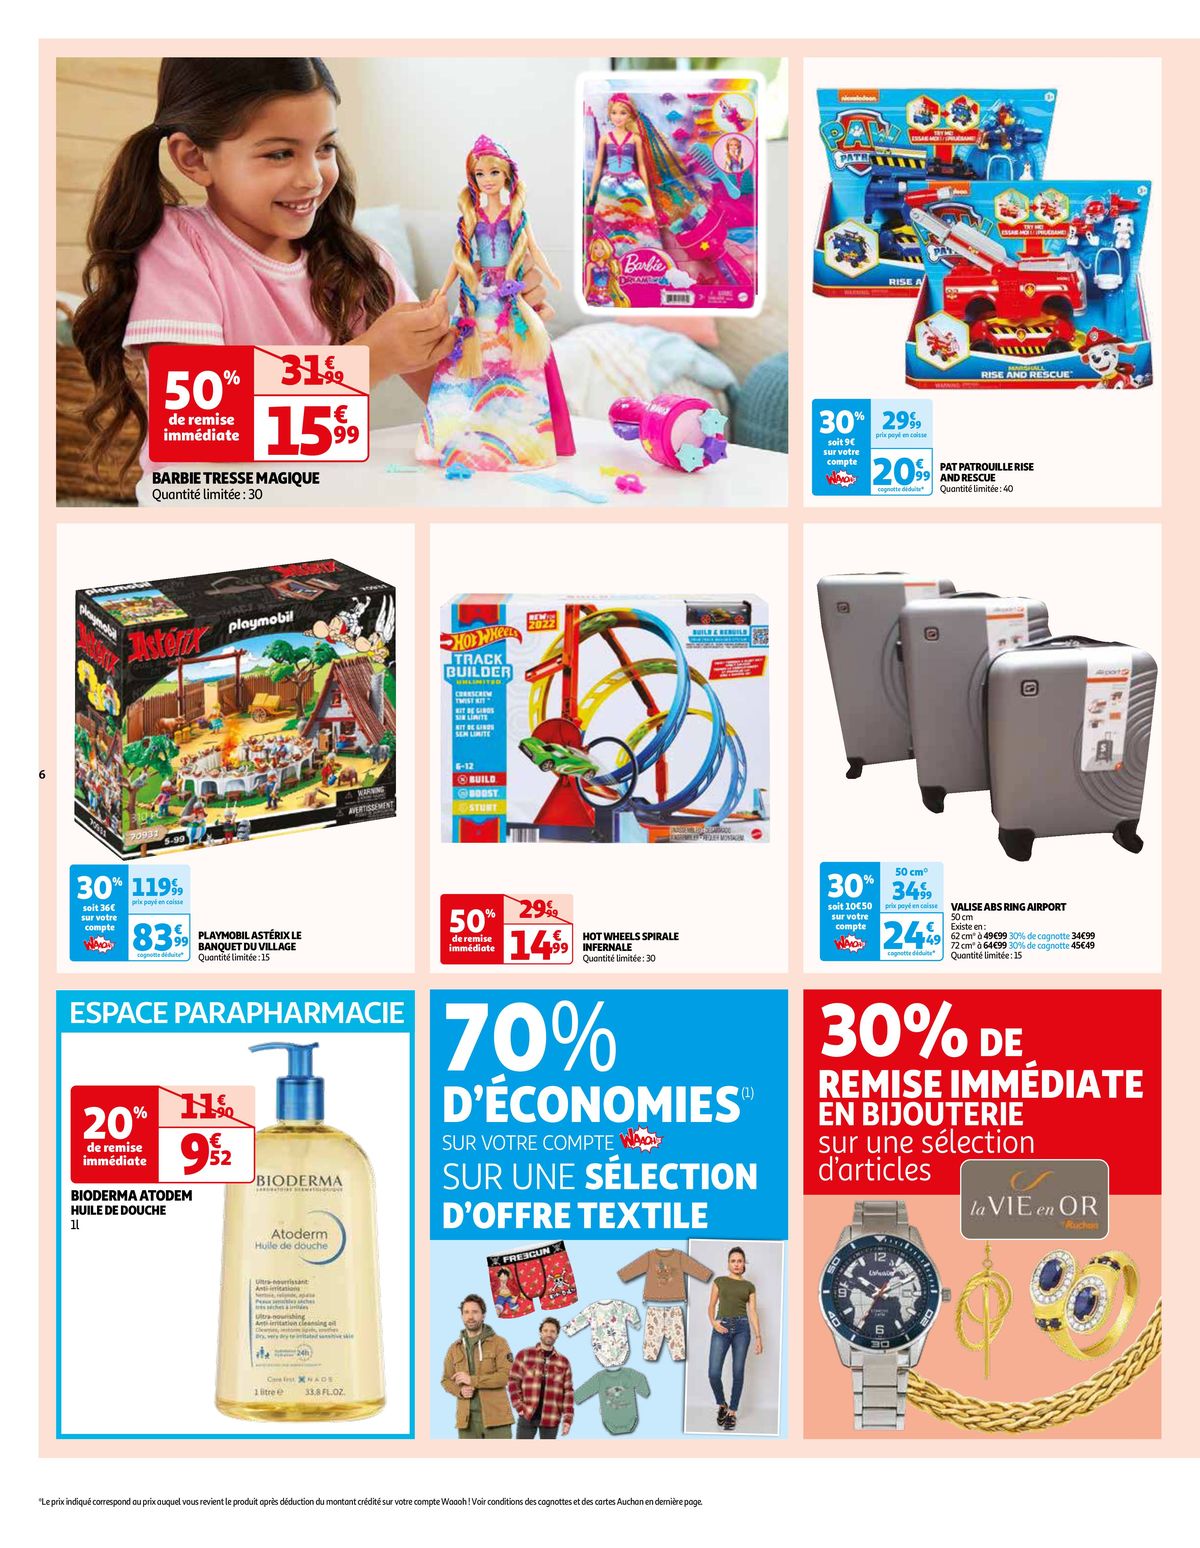 Catalogue Tract 6 jours incroyables Auchan Montivilliers, page 00006